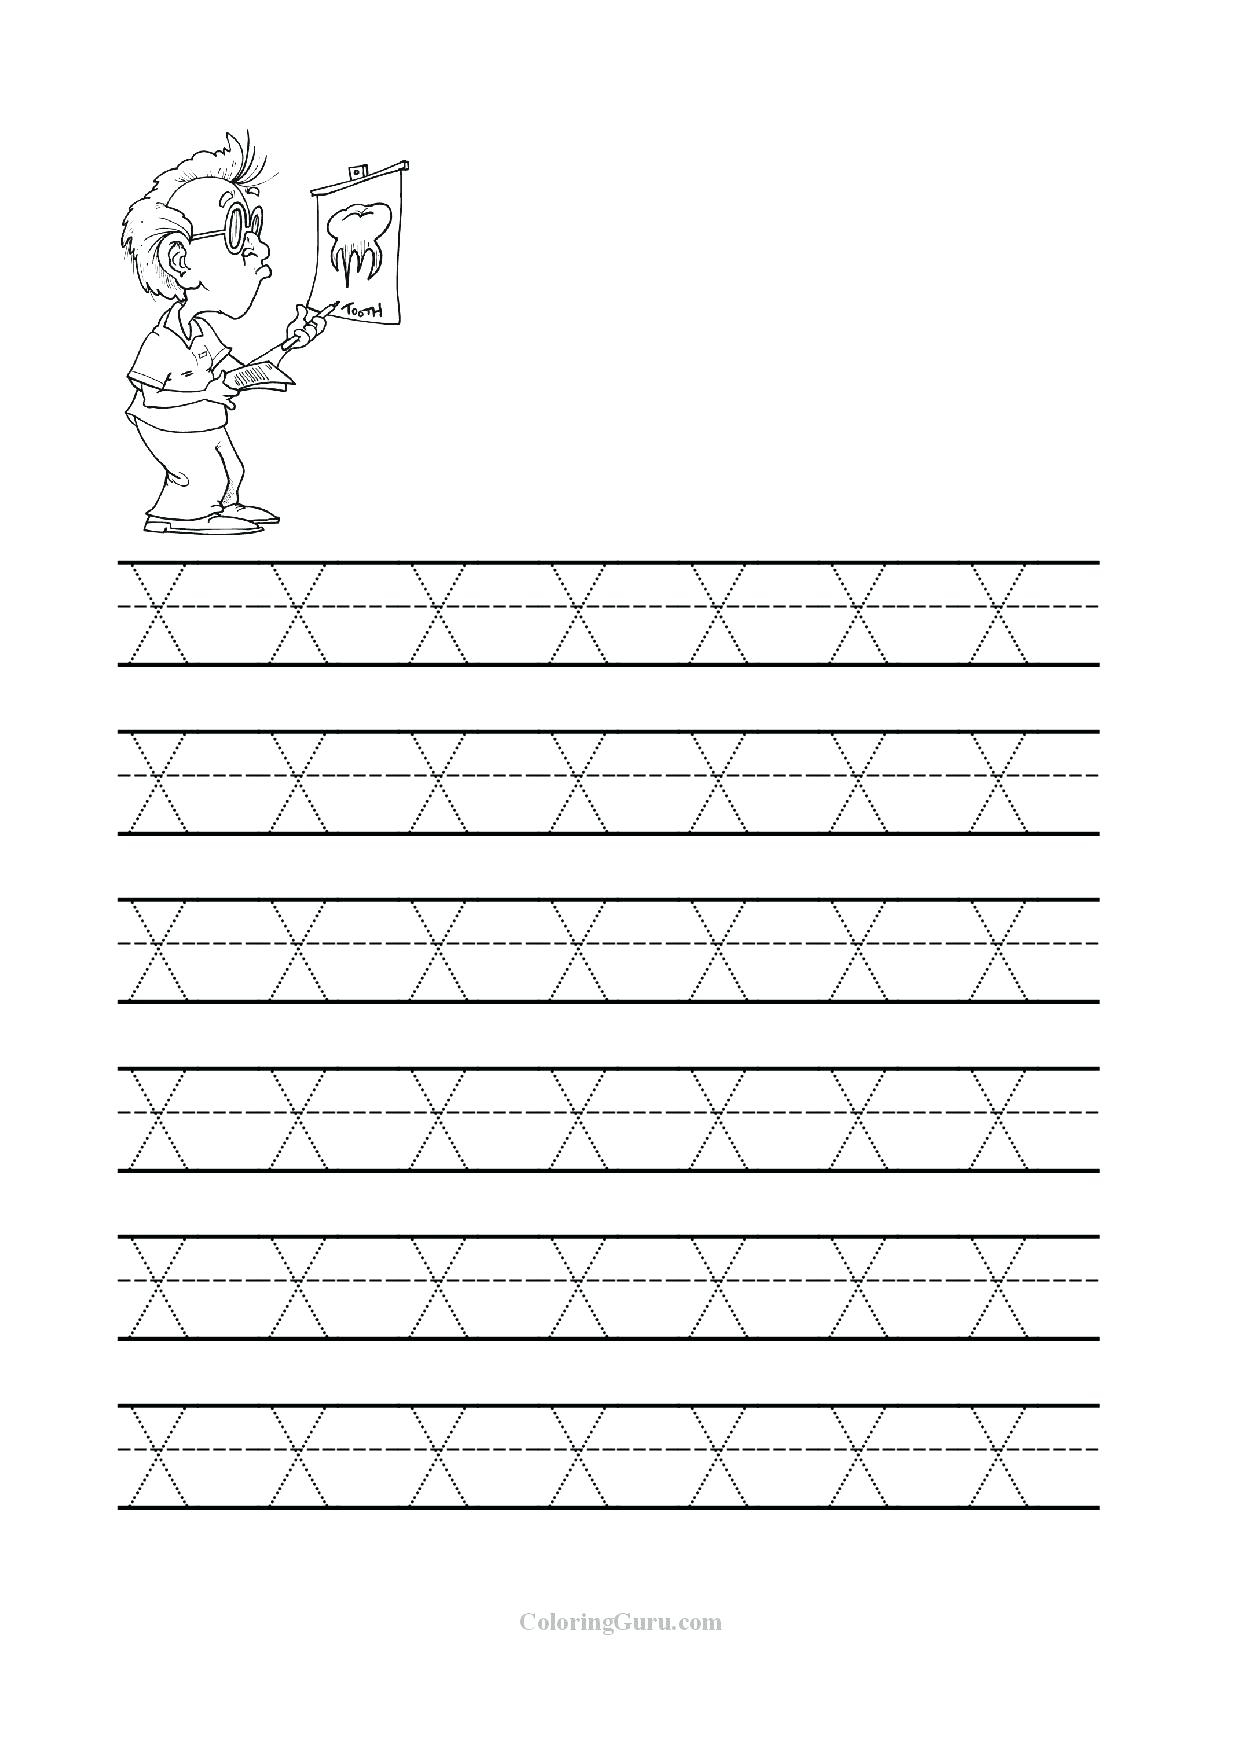 Coloring Book : Tracing Letter Worksheets Preschoolree Trace with Tracing Letters Worksheets Make Your Own